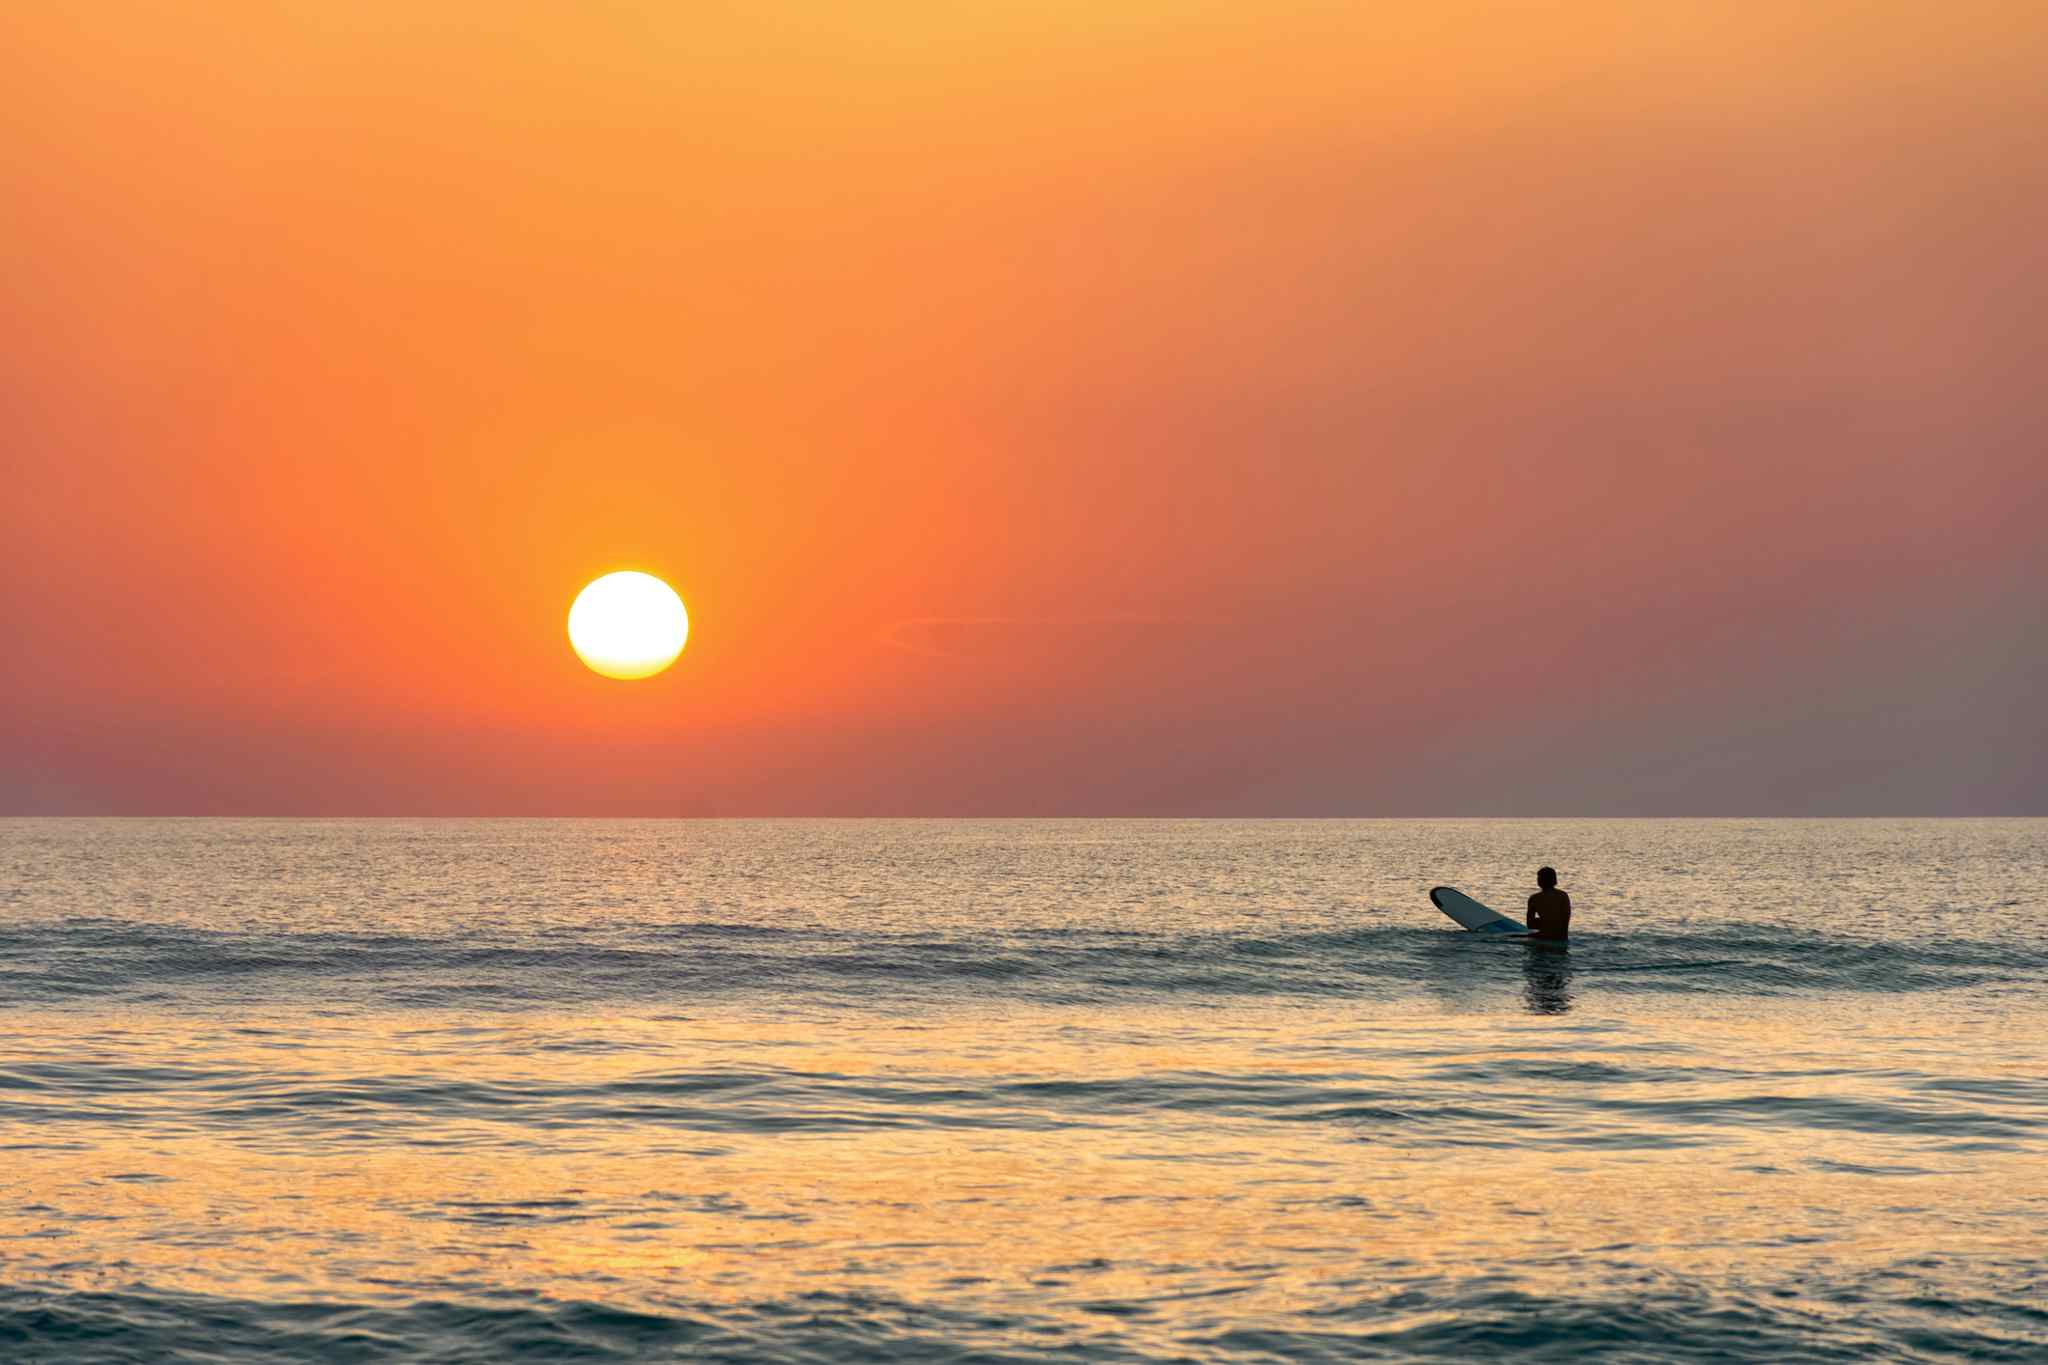 Surfer waiting for a wave at sunset in Bali, Indonesia